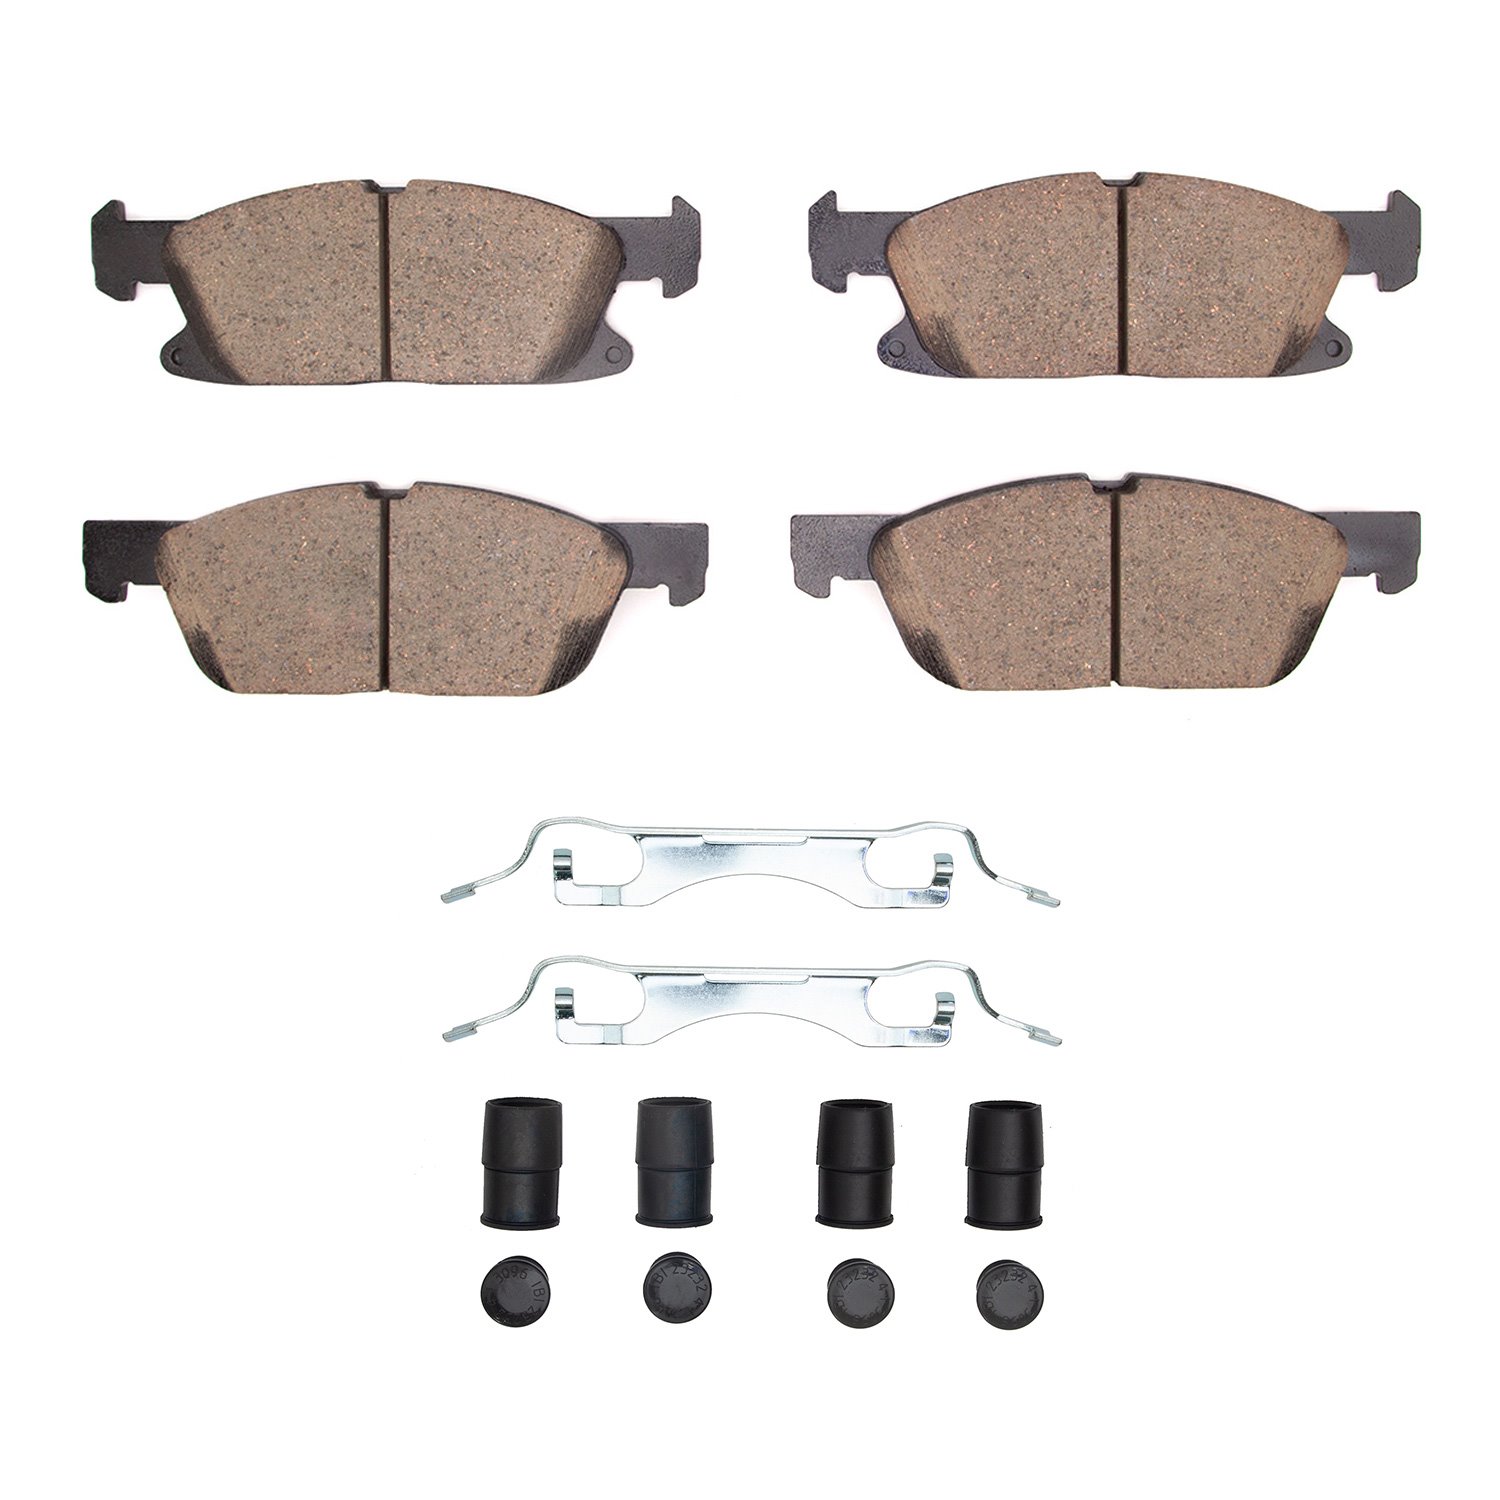 1551-2180-01 5000 Advanced Ceramic Brake Pads & Hardware Kit, Fits Select Ford/Lincoln/Mercury/Mazda, Position: Front